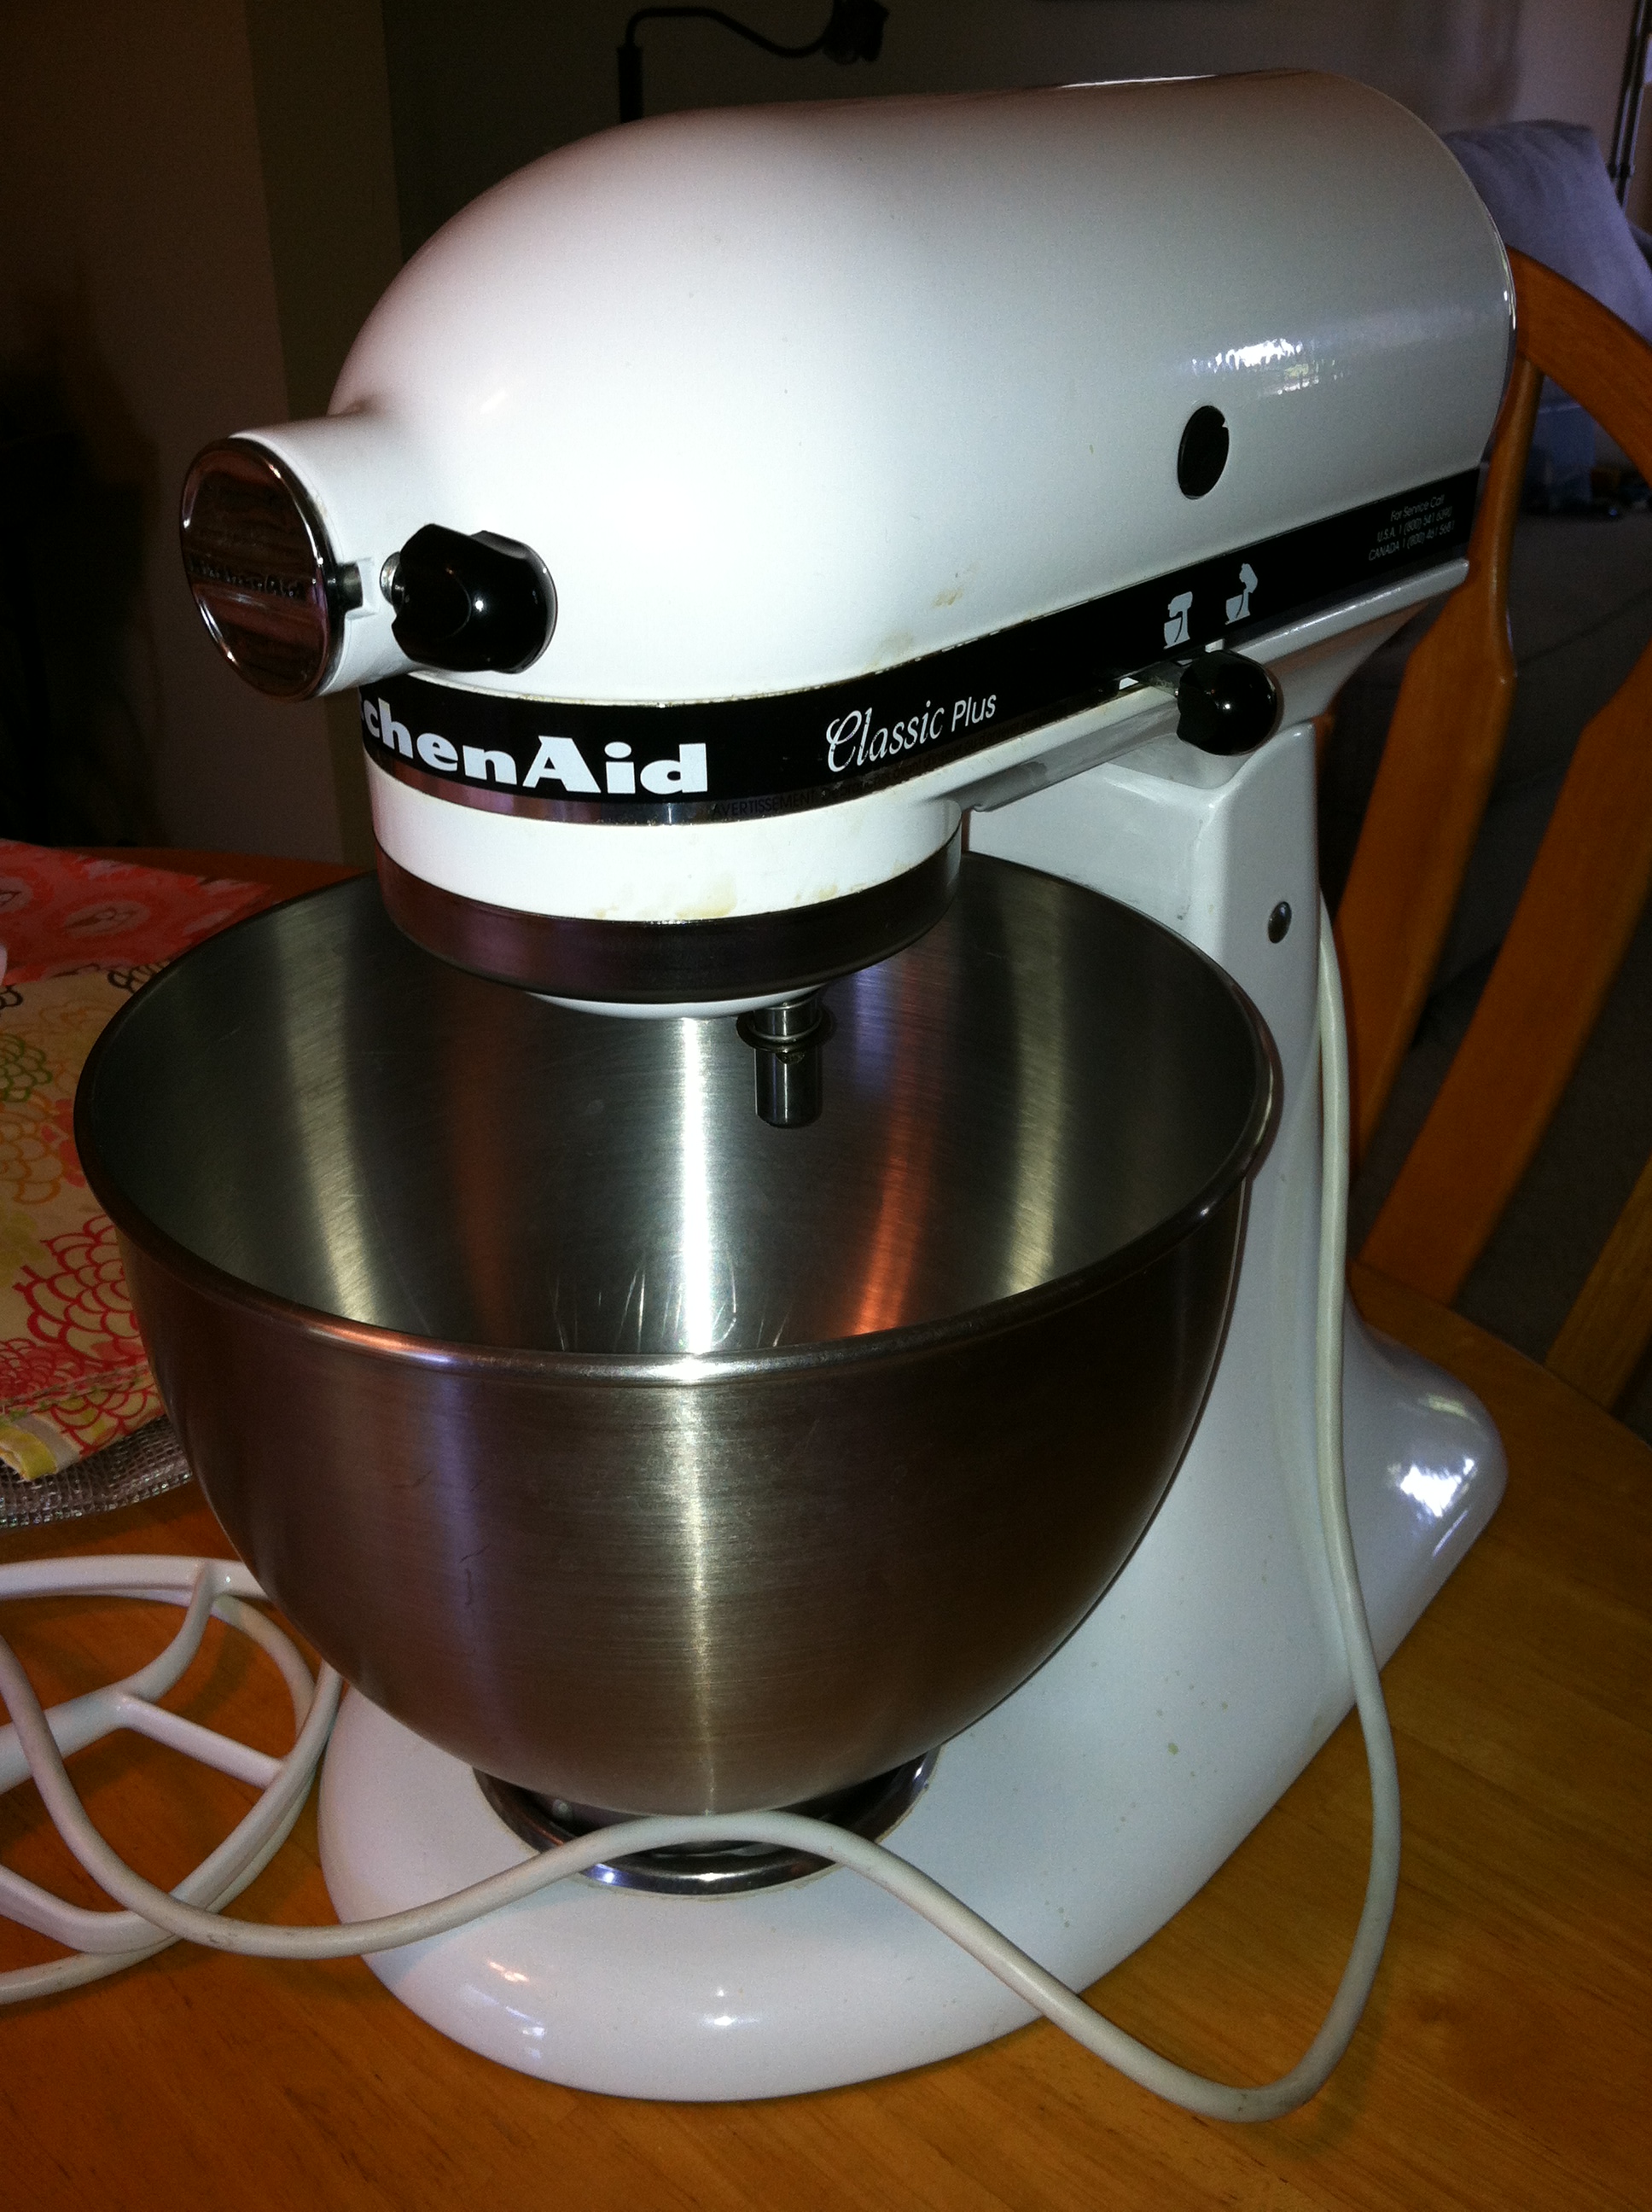 How To Sew A DIY Stand Mixer Cover